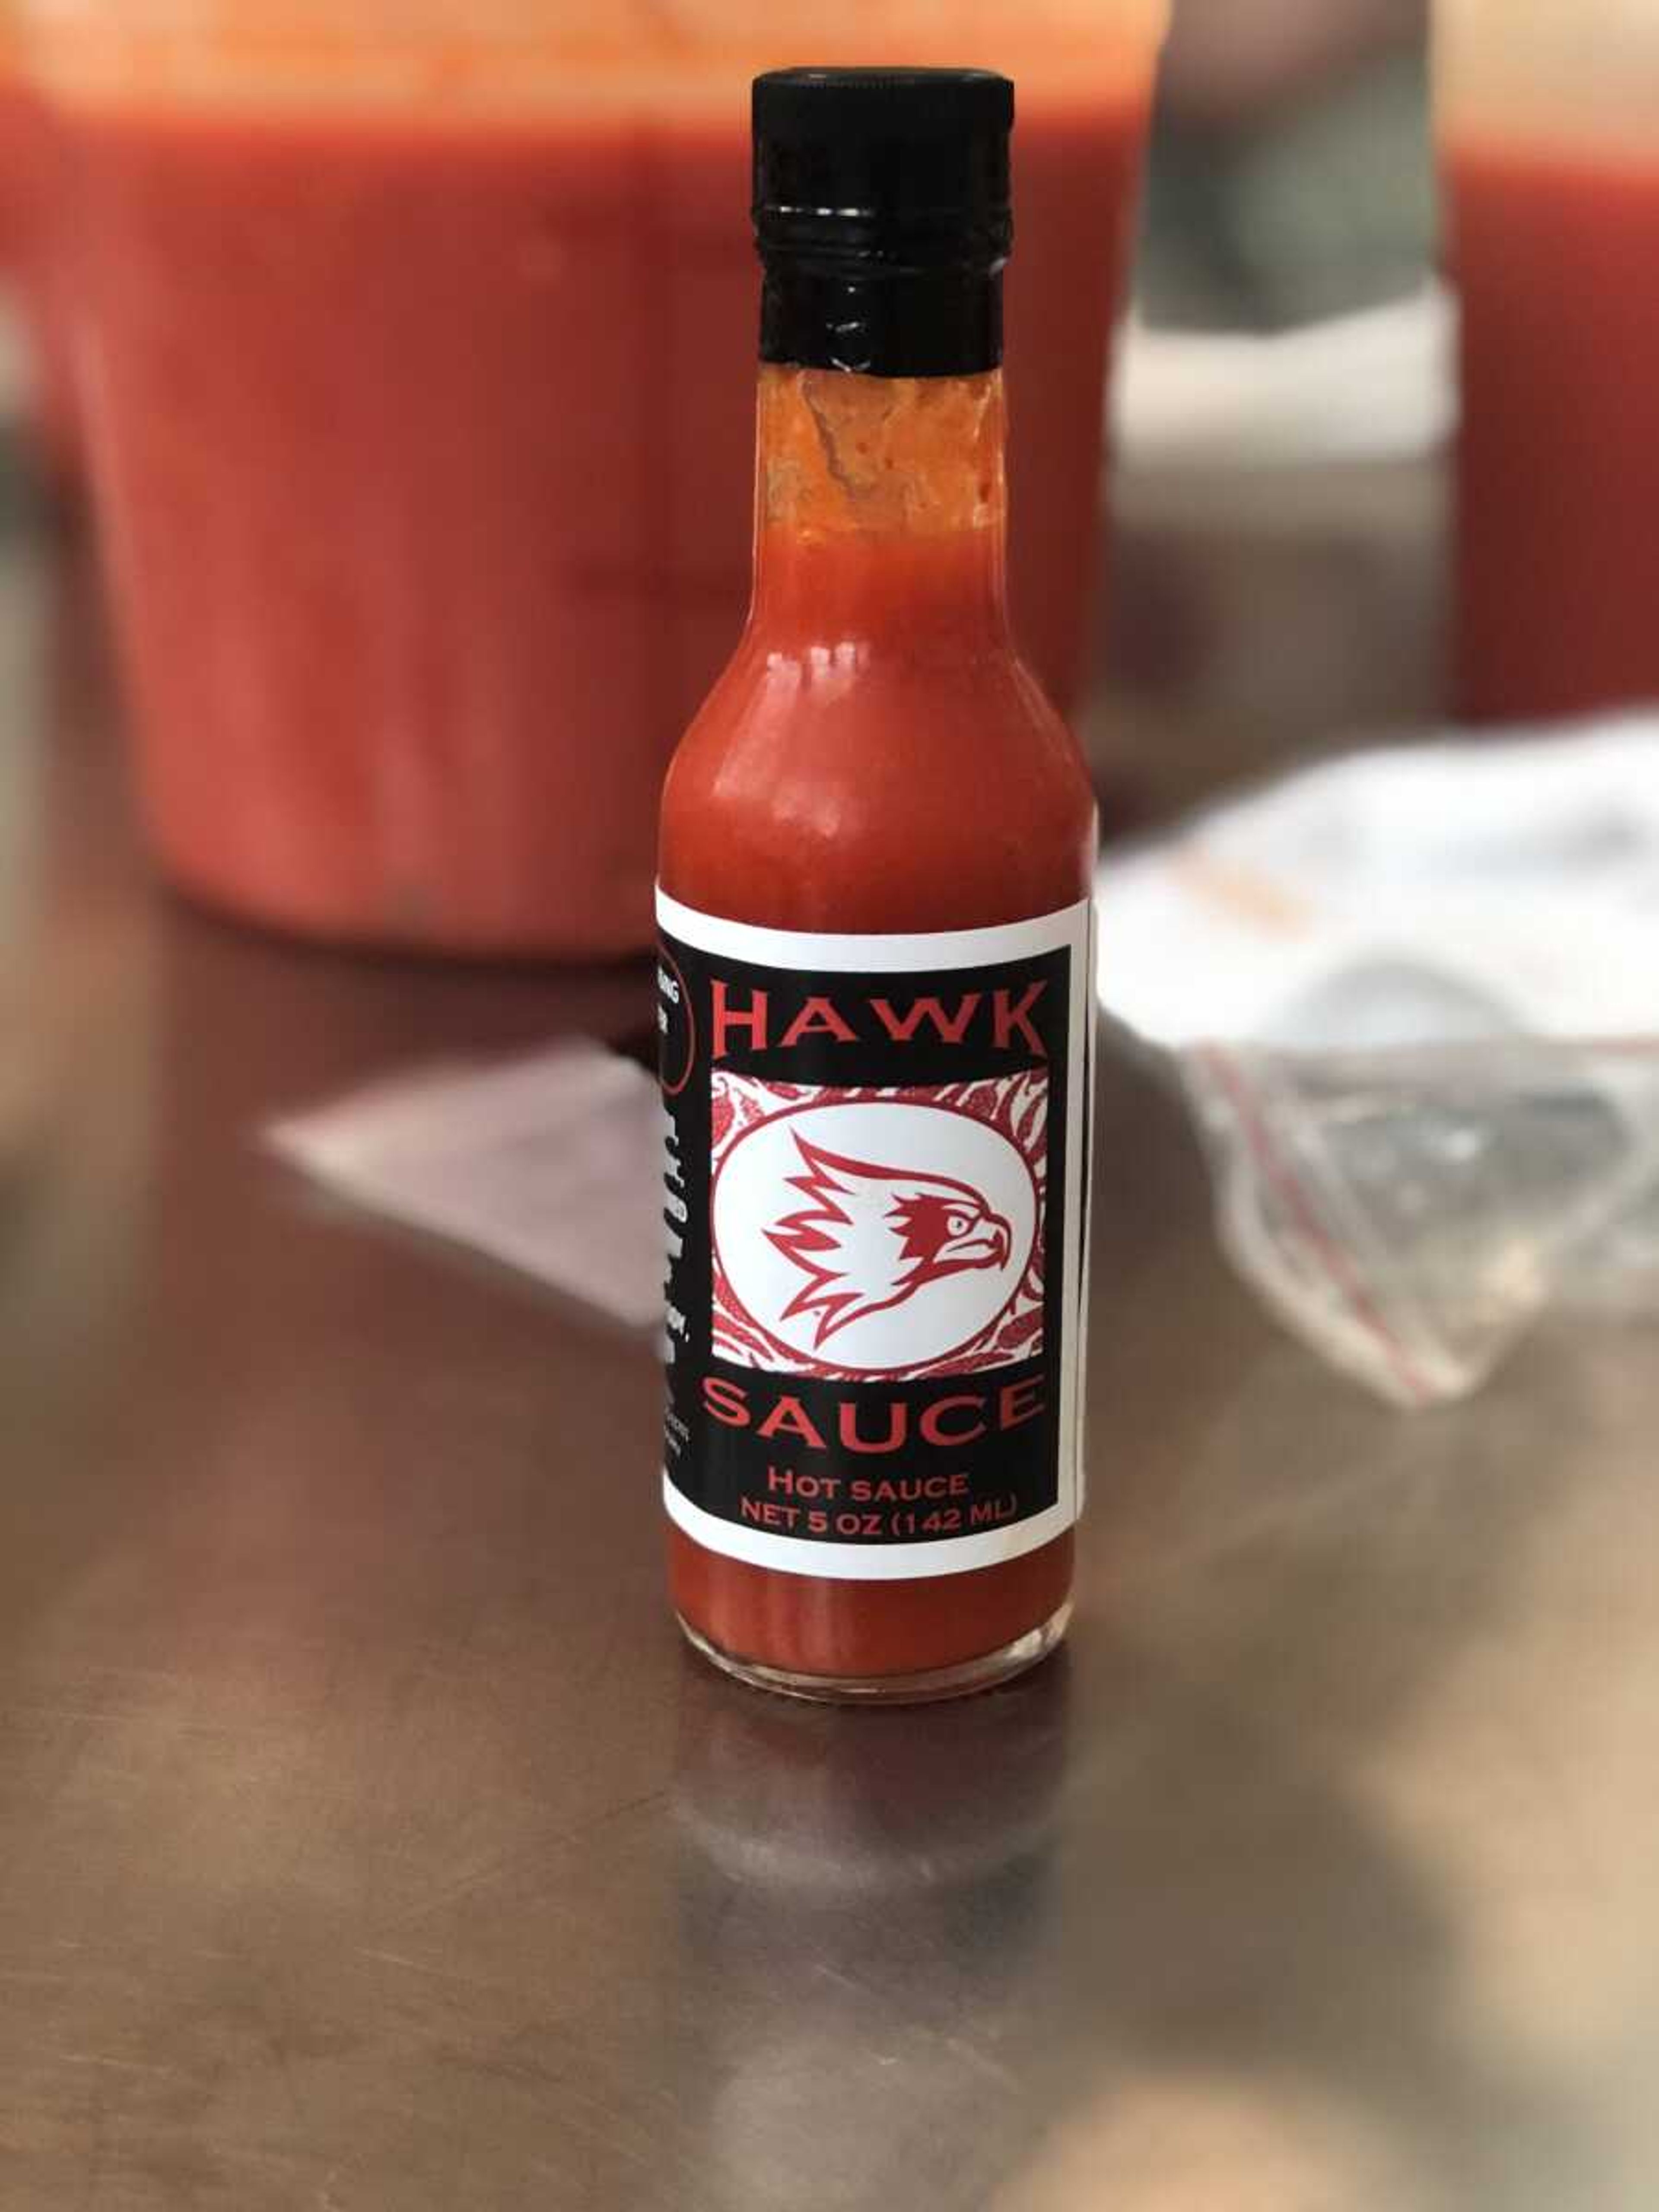 Hawk Sauce is heating back up